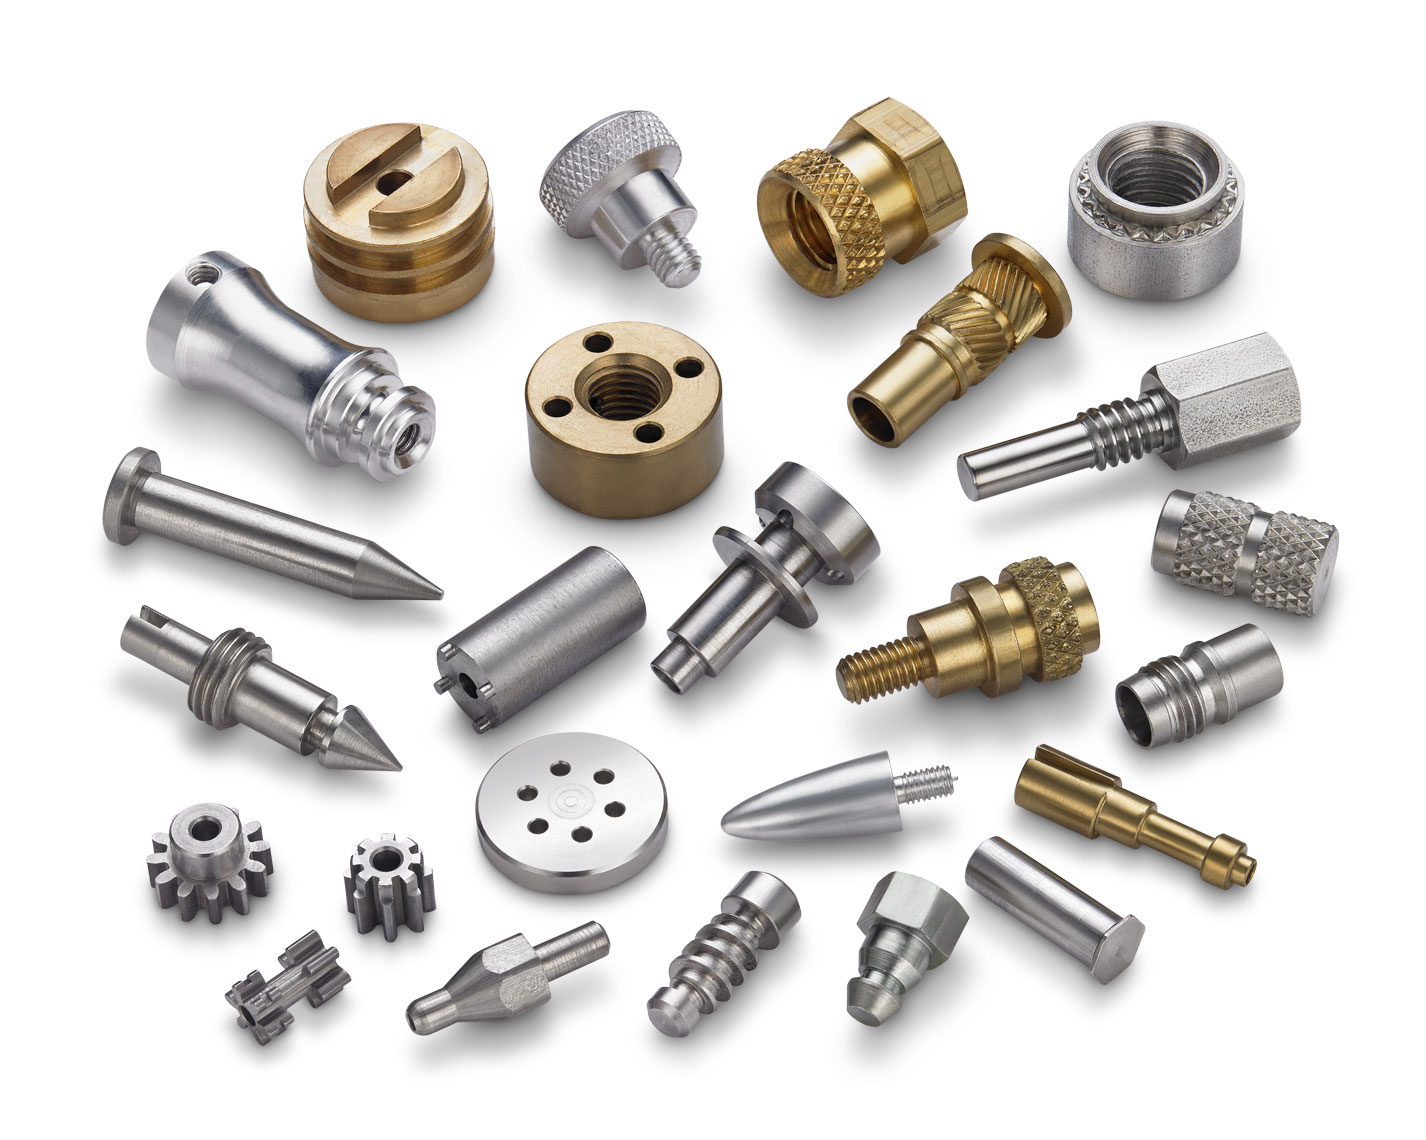 Metal machined parts/metal/brass/wt bkgd/product photography